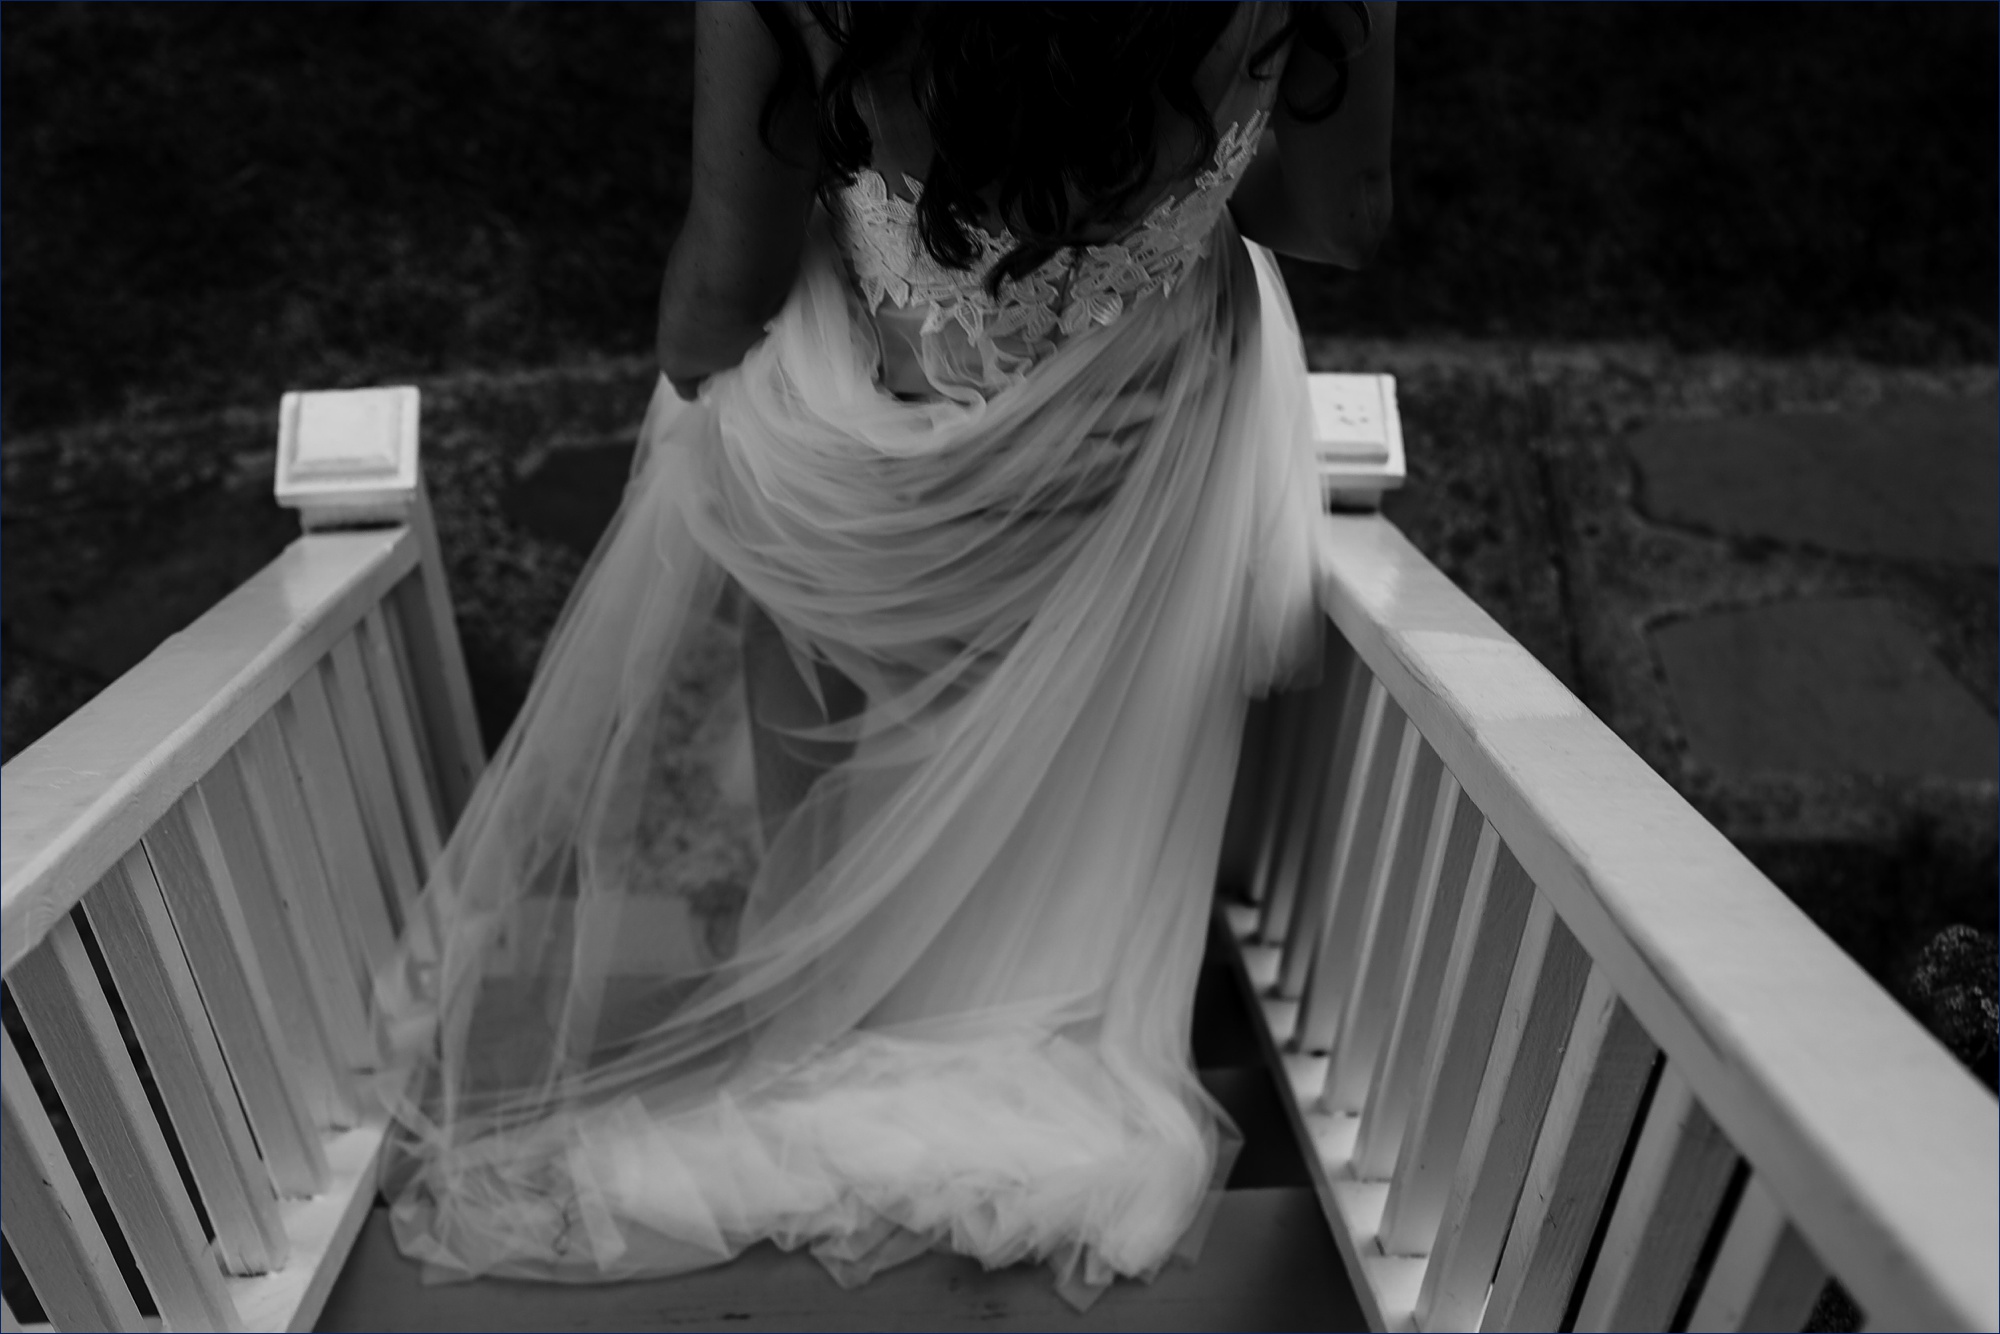 The bride in her tulle dress heads down the stairs to the wedding reception in Maine